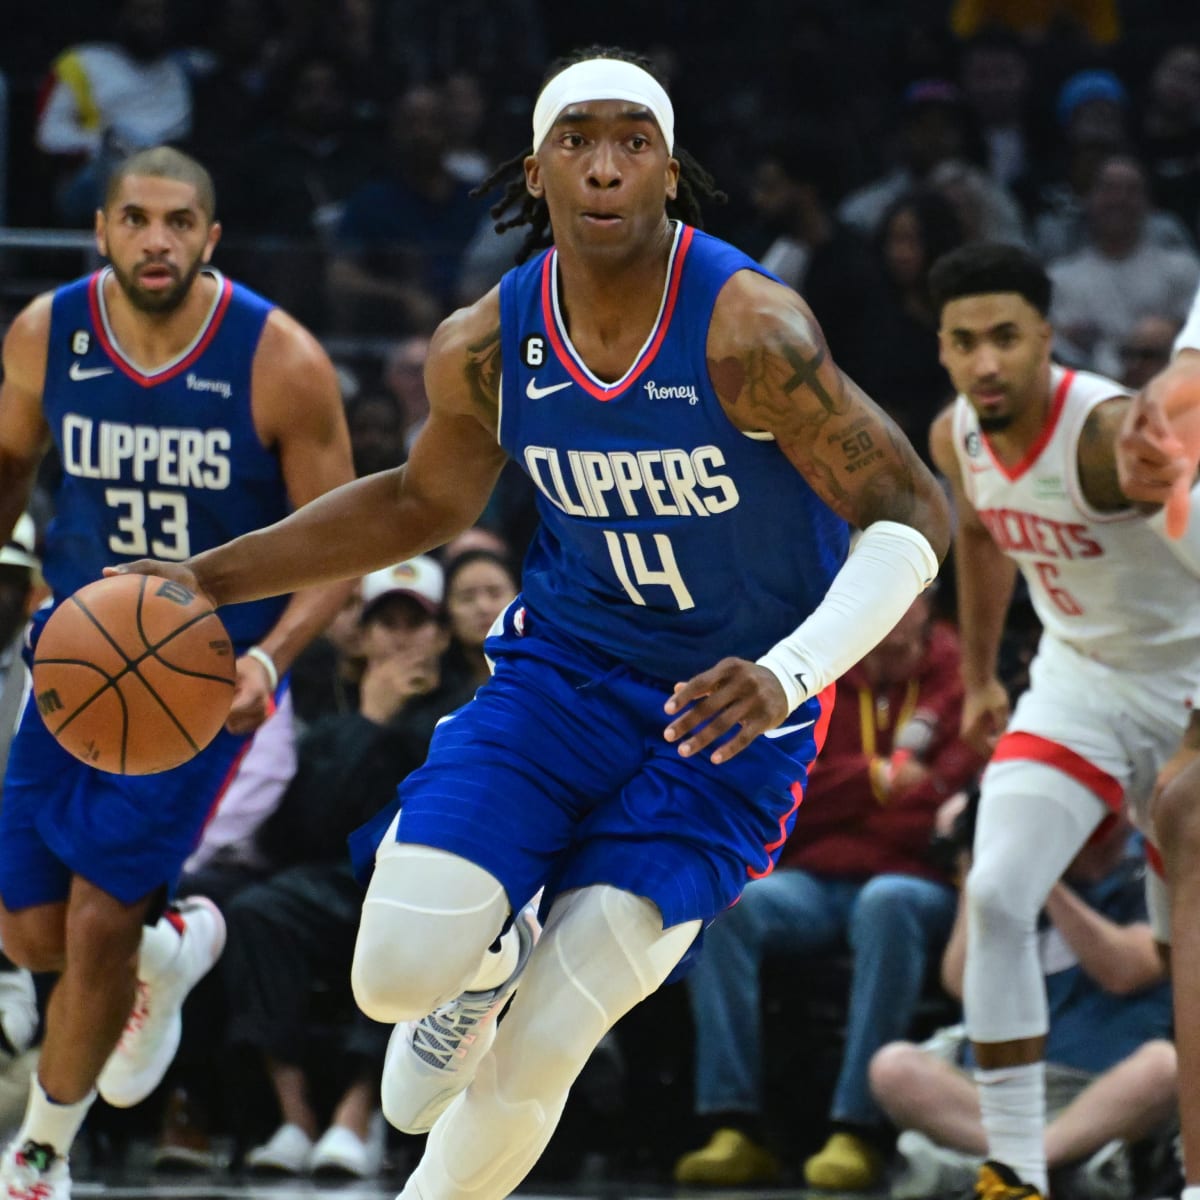 Mann of the hour: Terance Mann's performance helps Clippers make